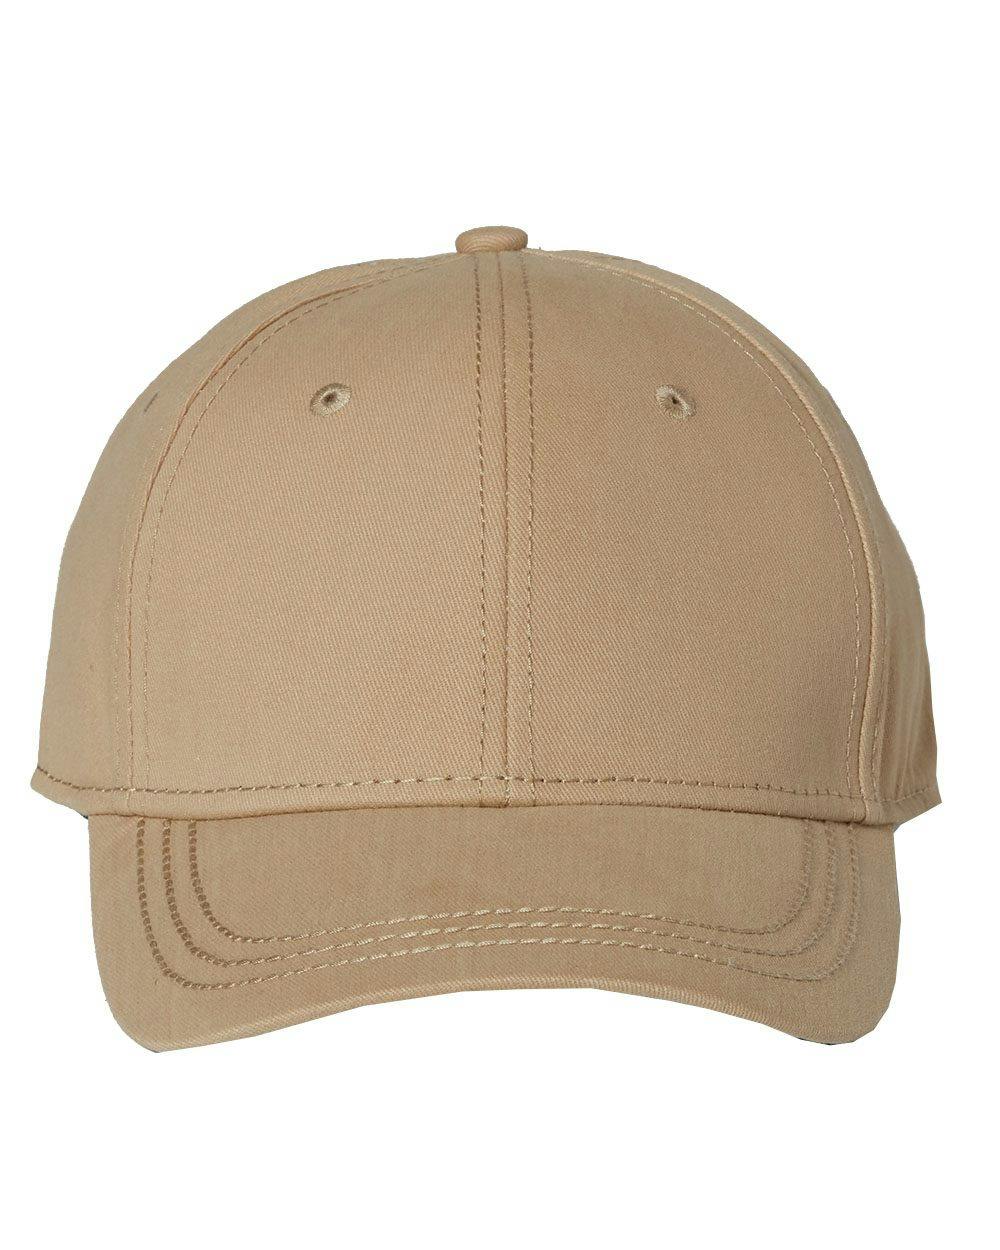 Image for Heritage Twill Cap - 3220